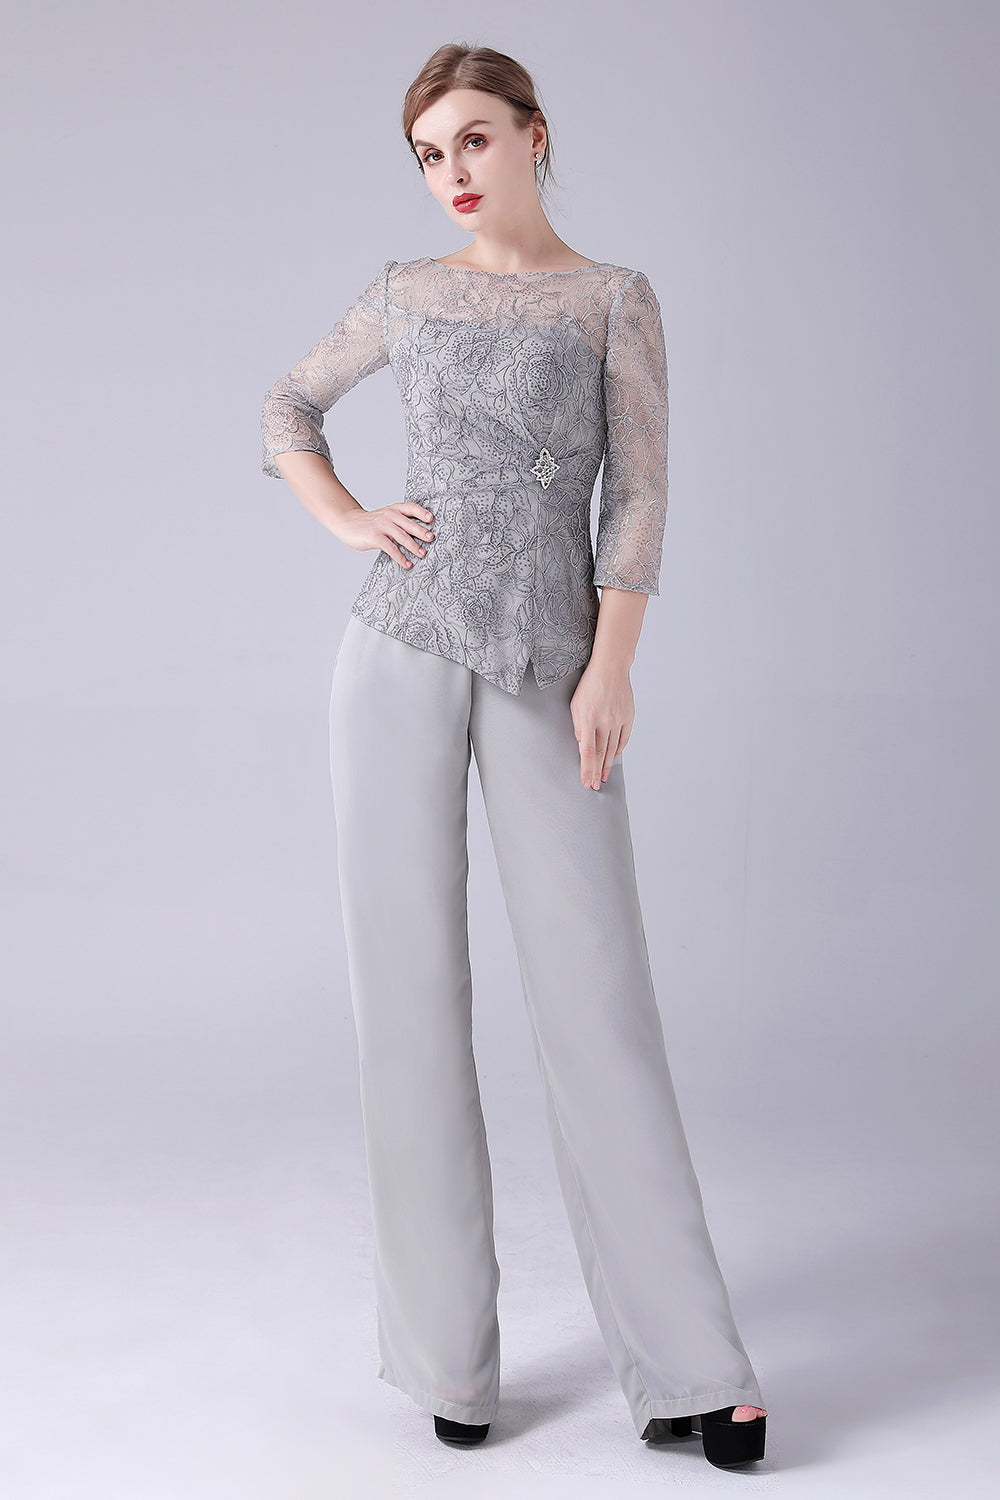 Silver 2 Pieces Slim Elegant Mother of the Bride Pant Suits